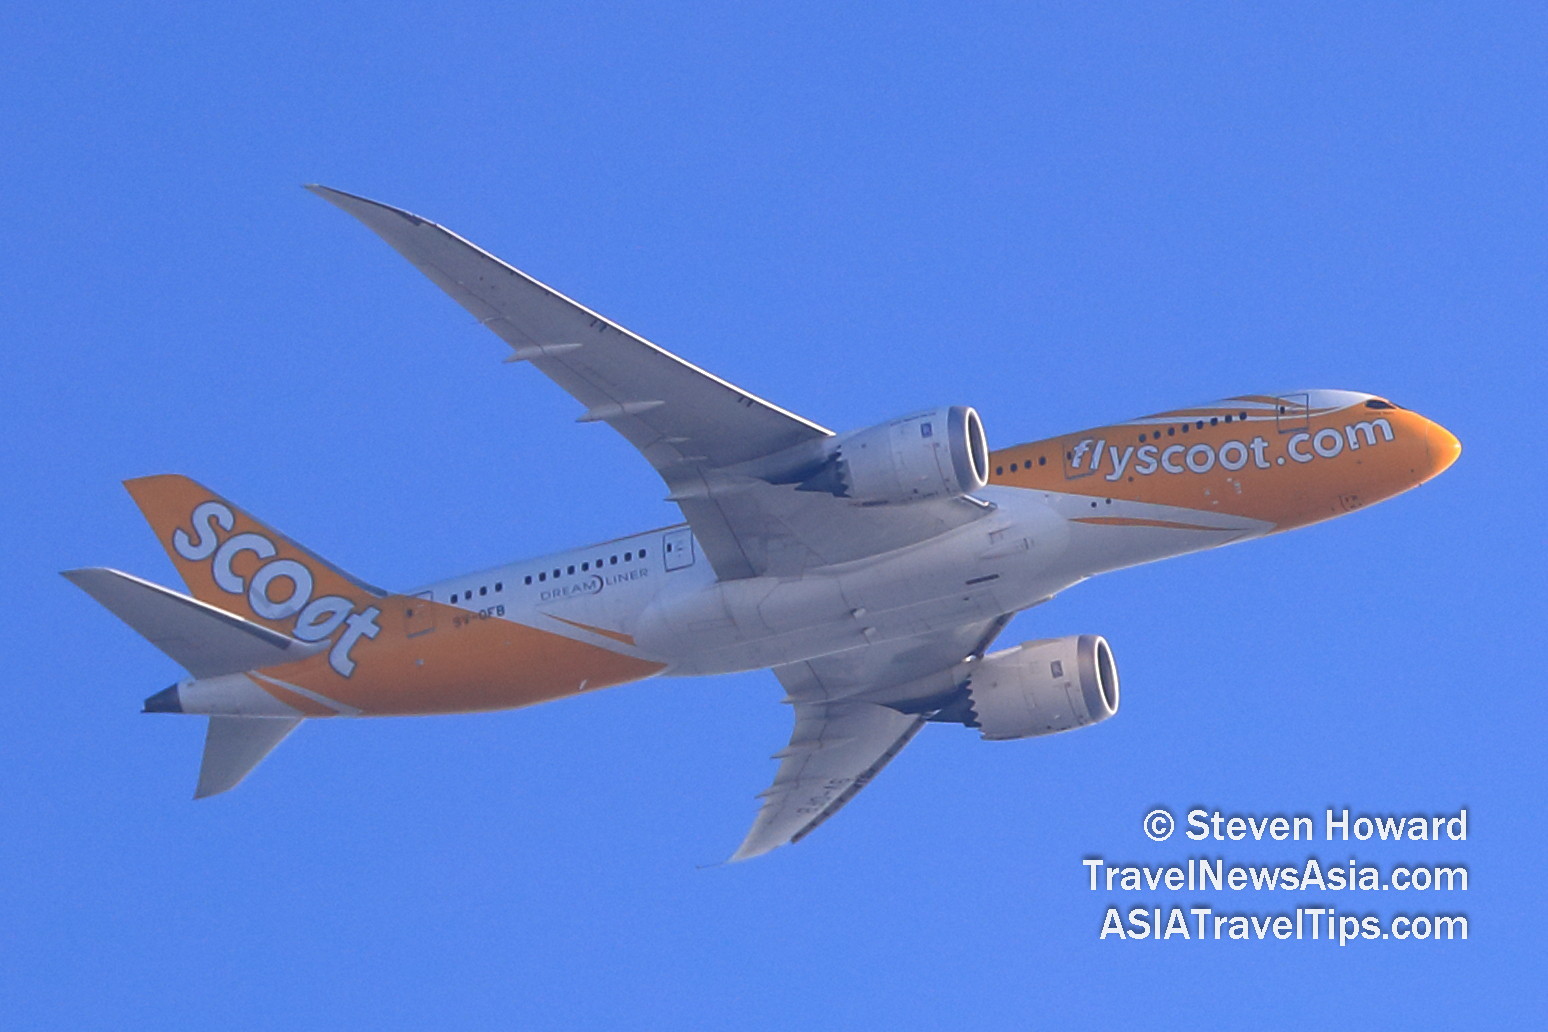 Scoot Boeing 787-8 reg: 9V-OFB. Picture by Steven Howard of TravelNewsAsia.com Click to enlarge.